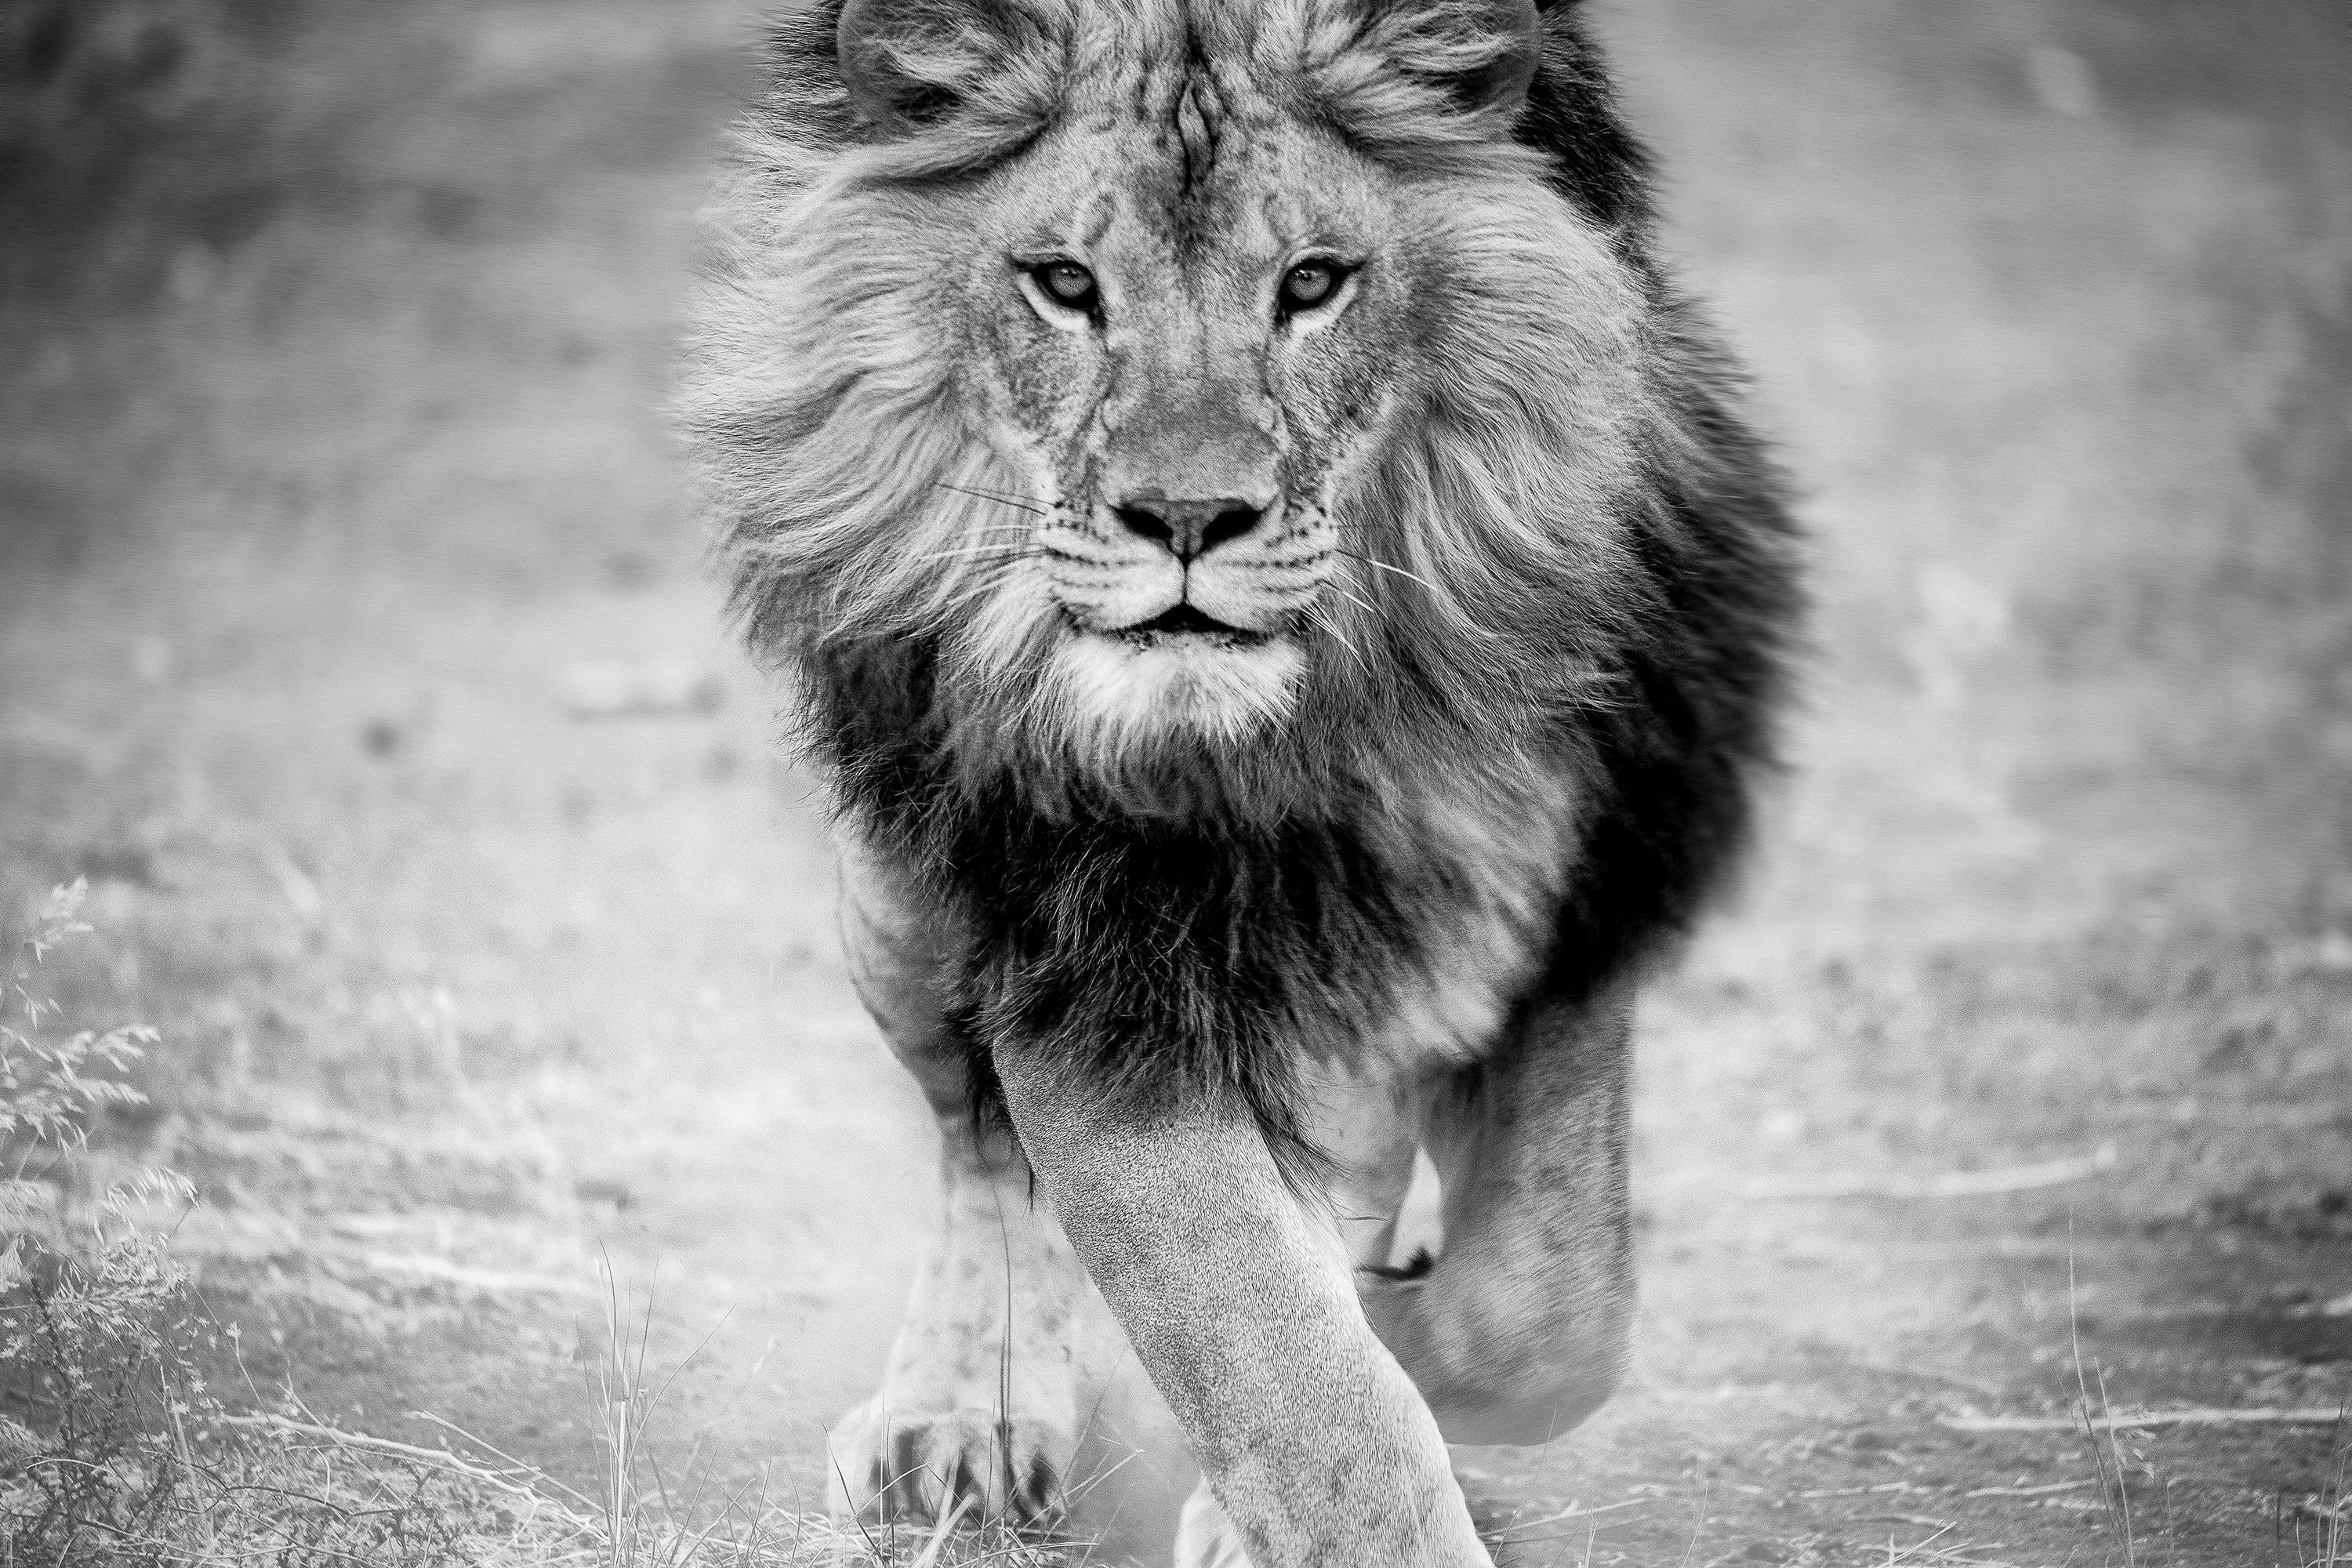 Shane Russeck Black and White Photograph - "Panthera Leo" - 40x60 Black and White Lion Photography, Africa, Photograph, Art